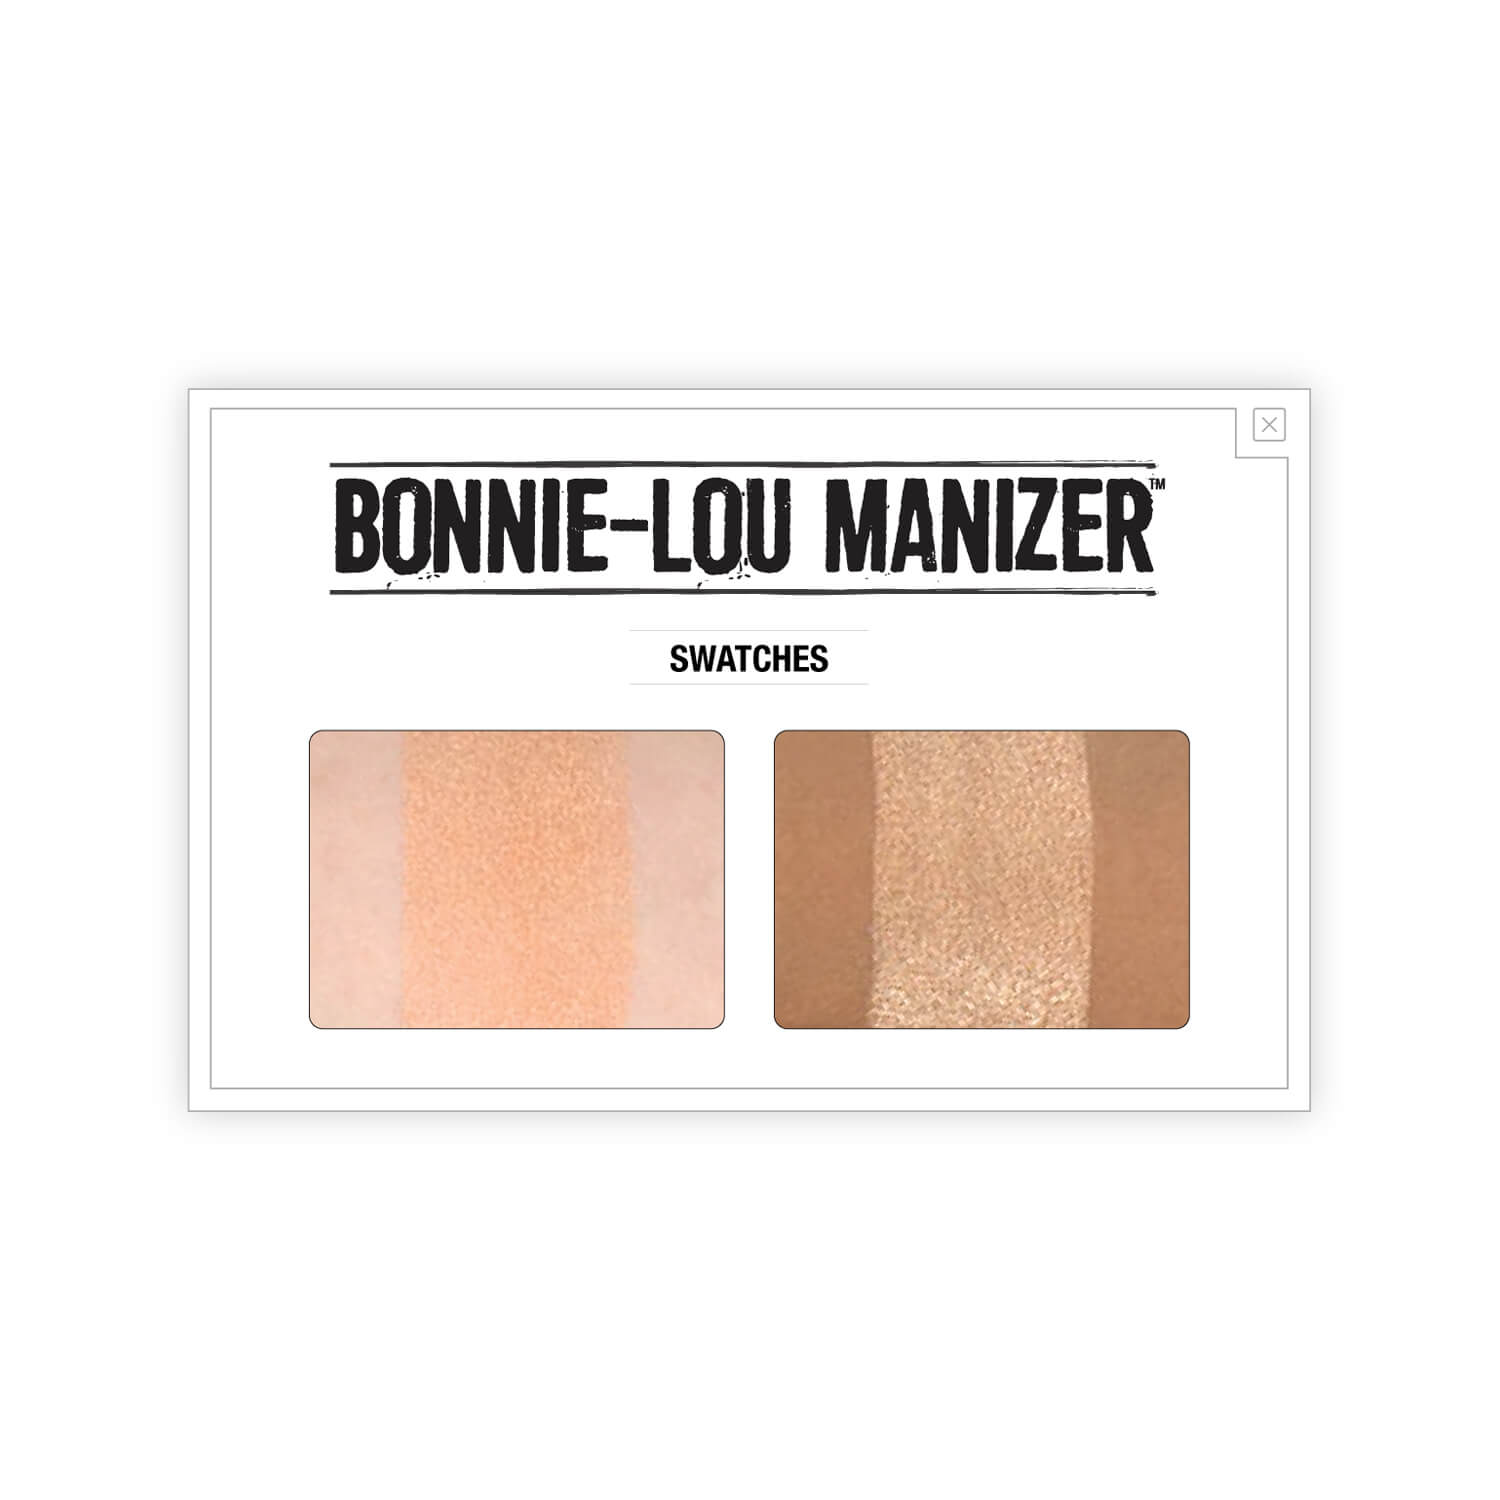 theBalm Bonnie-Lou Manizer Highlighter & Shimmer Swatches